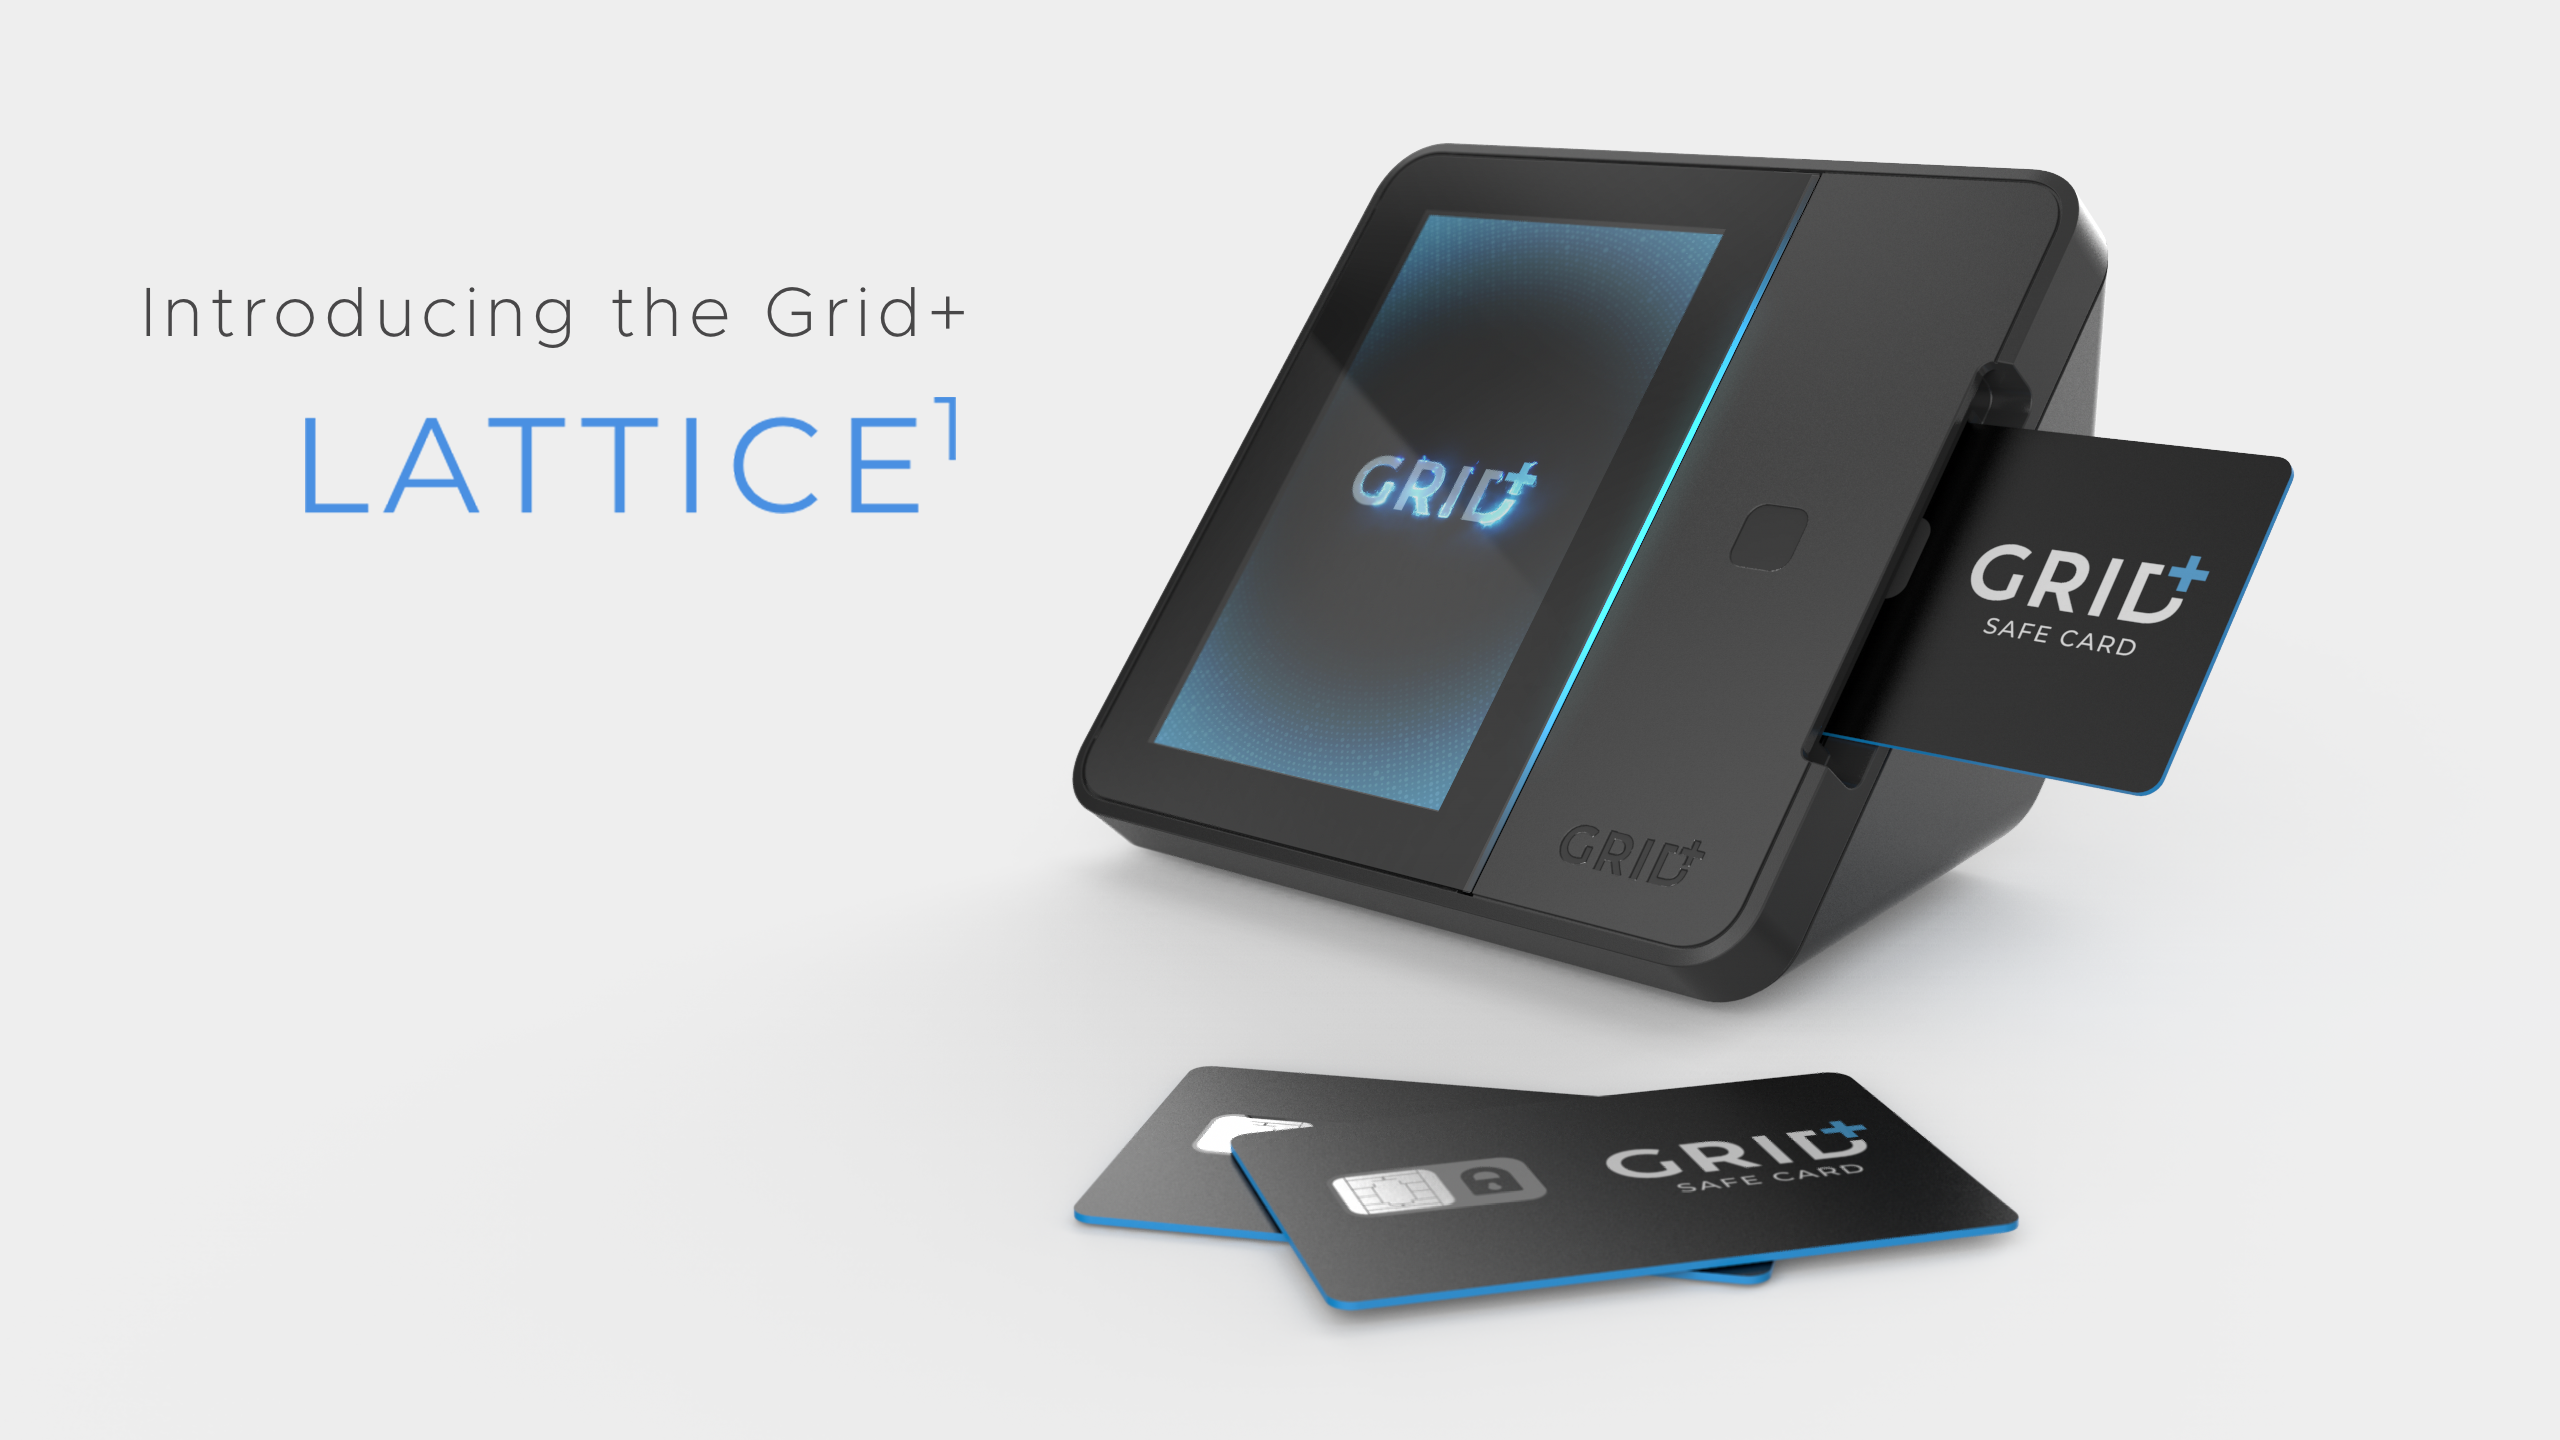 GridPlus Lattice 1 Hardware Wallet: With unique hardware security features, a large touch screen, and wireless connectivity, the GridPlus Lattice1 is a programmable hardware wallet that makes using crypto enjoyable while securing your assets against threats of any magnitude